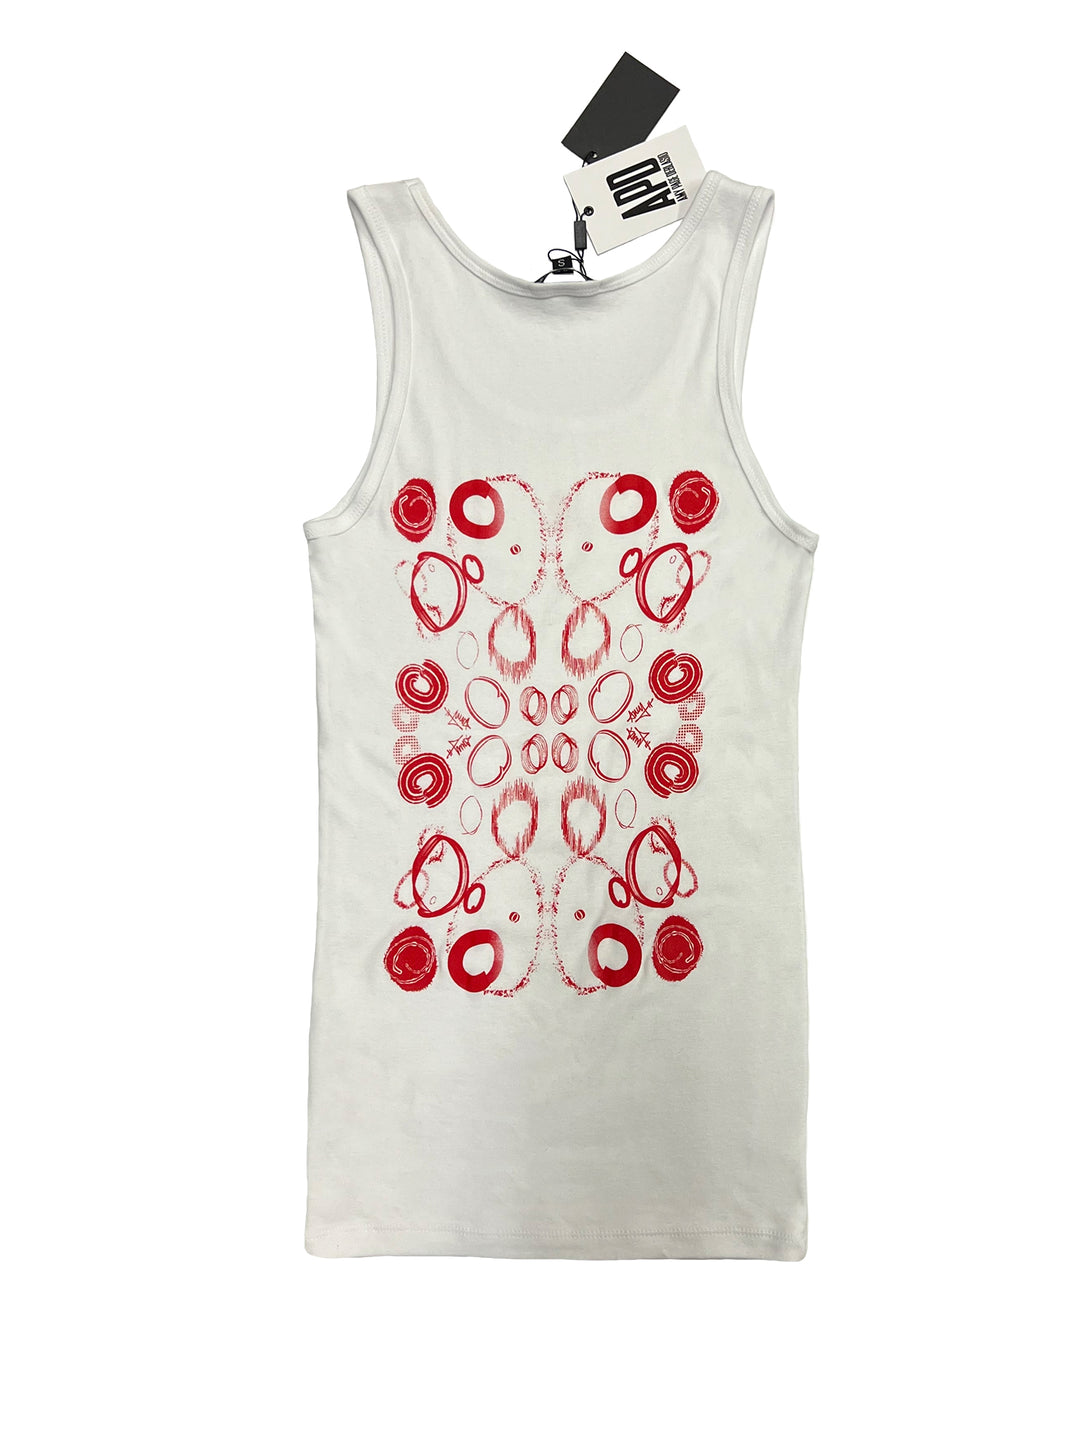 Tank Top with Custom Print Graphic in White Cotton